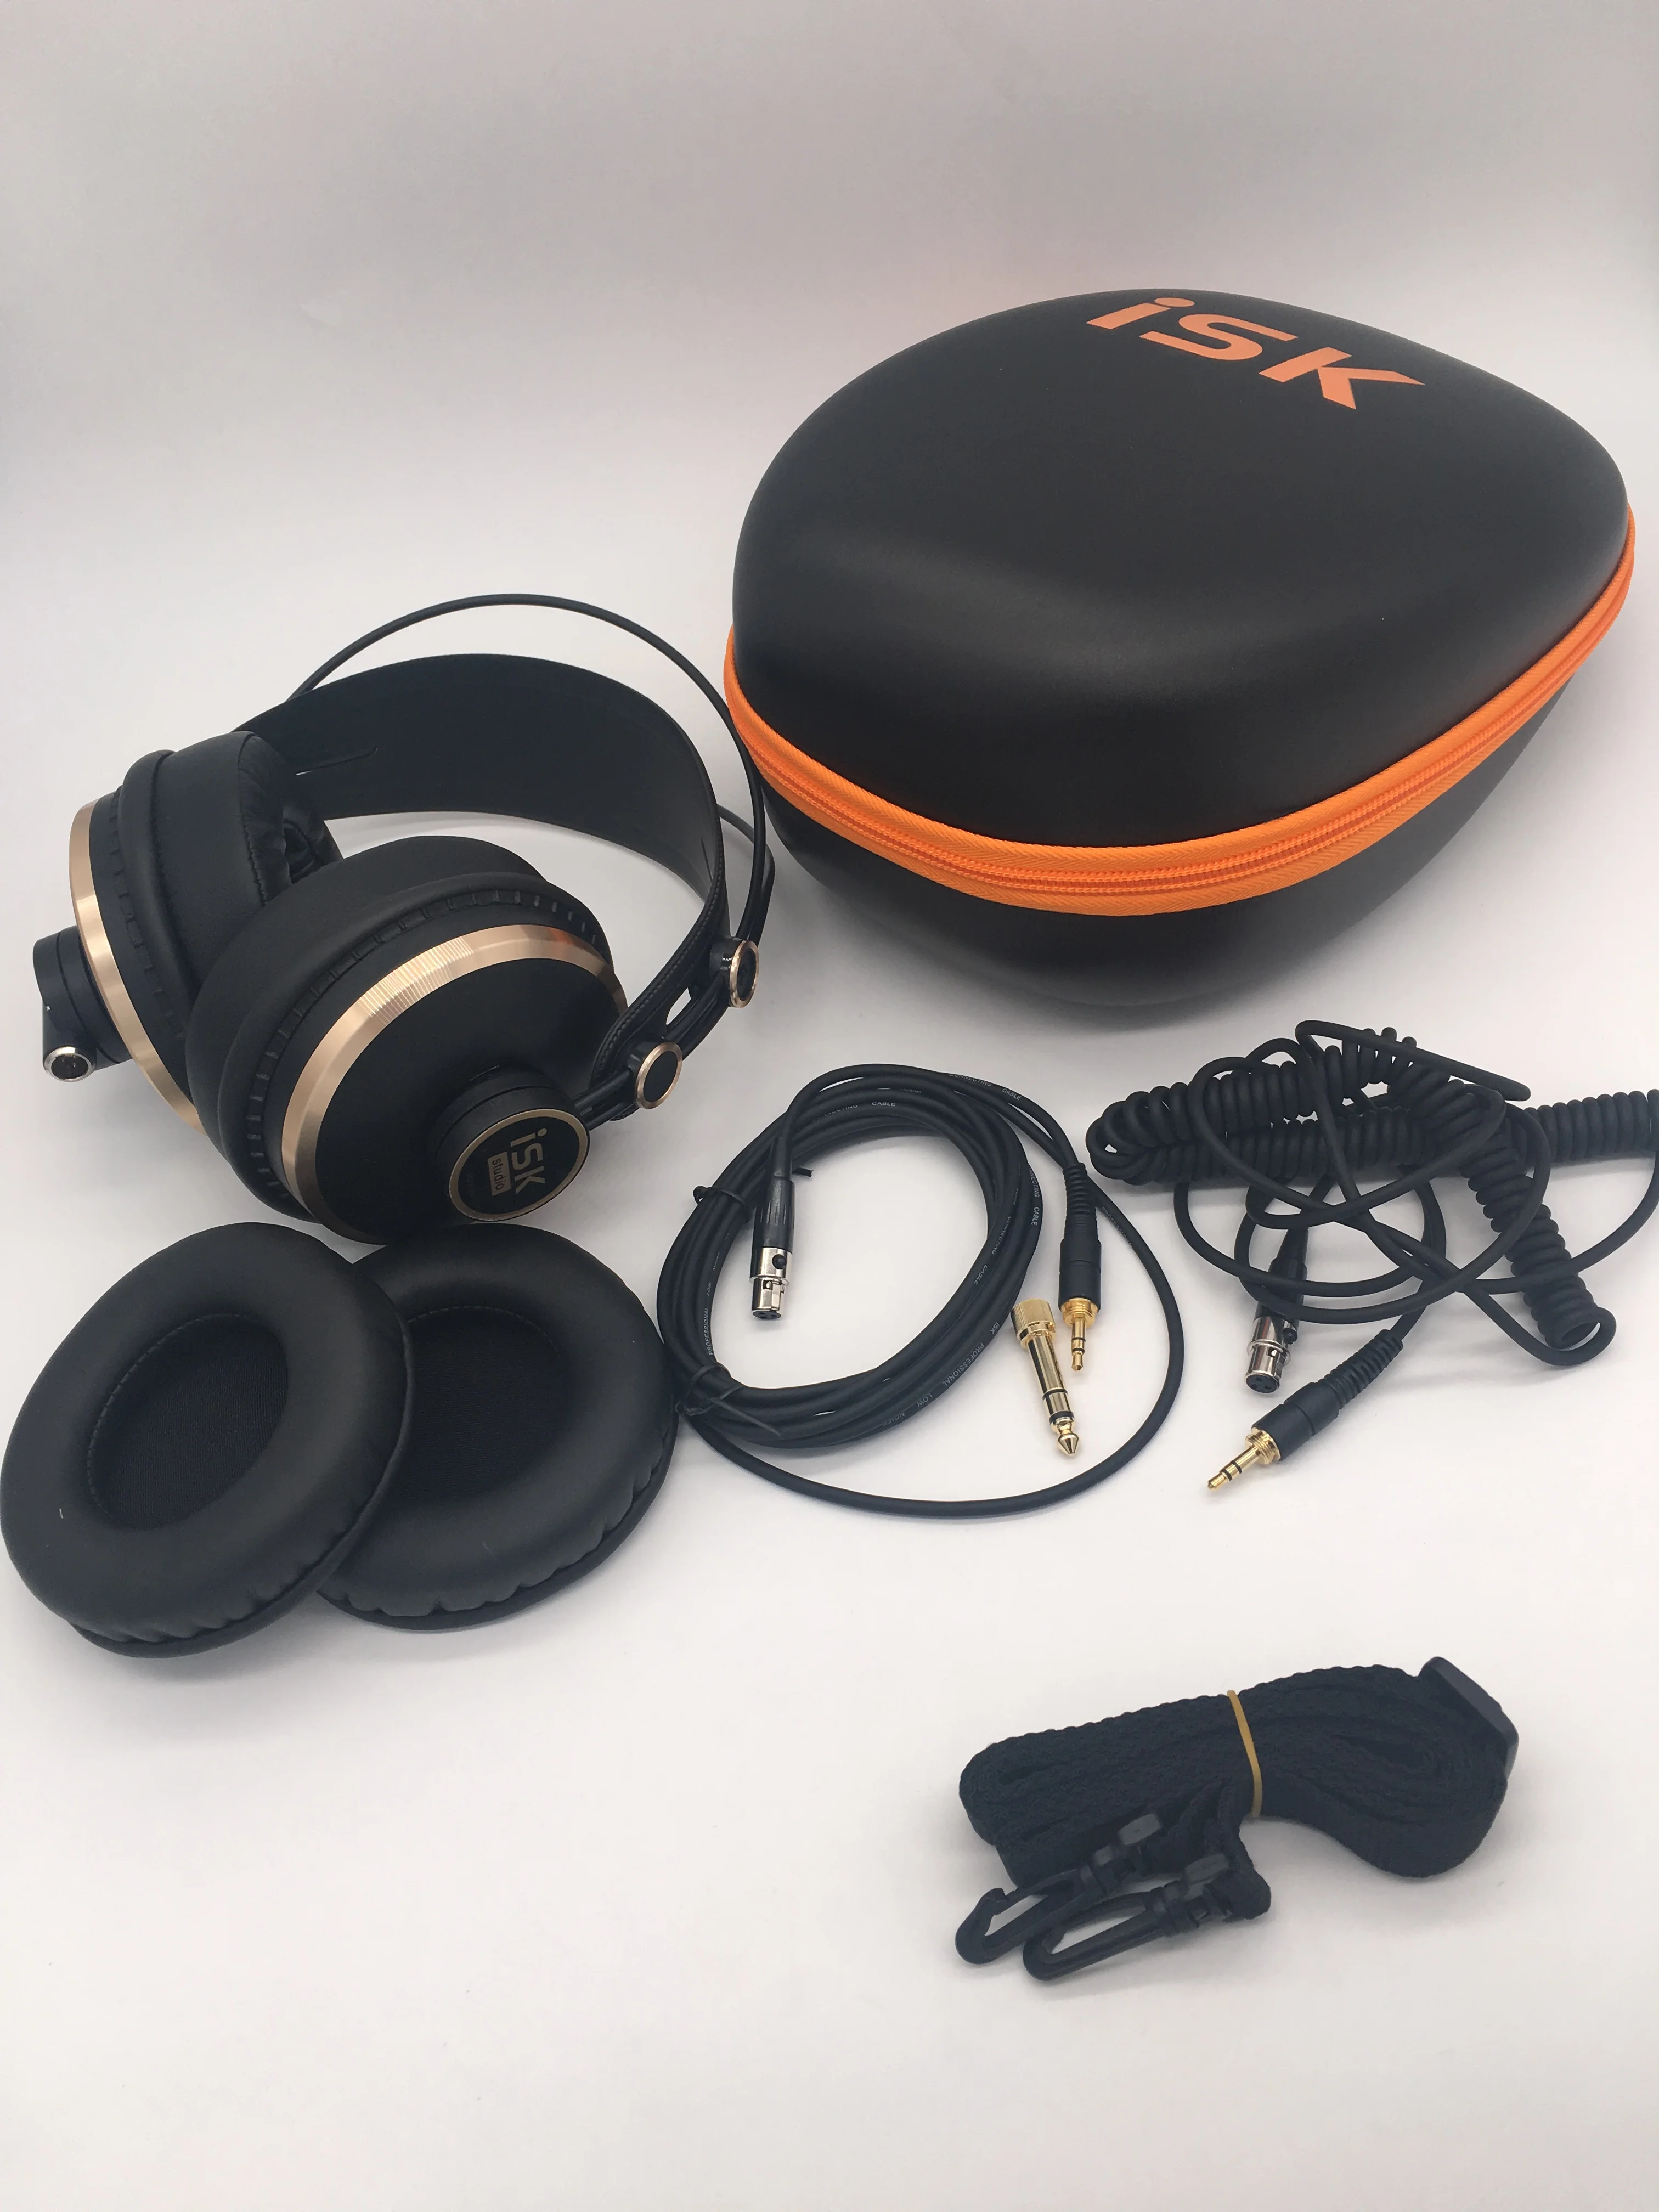 iSK HD9999 monitor headphone fully enclosed monitoring earphone DJ/audio mixing/recording studio headset,signal cable separation